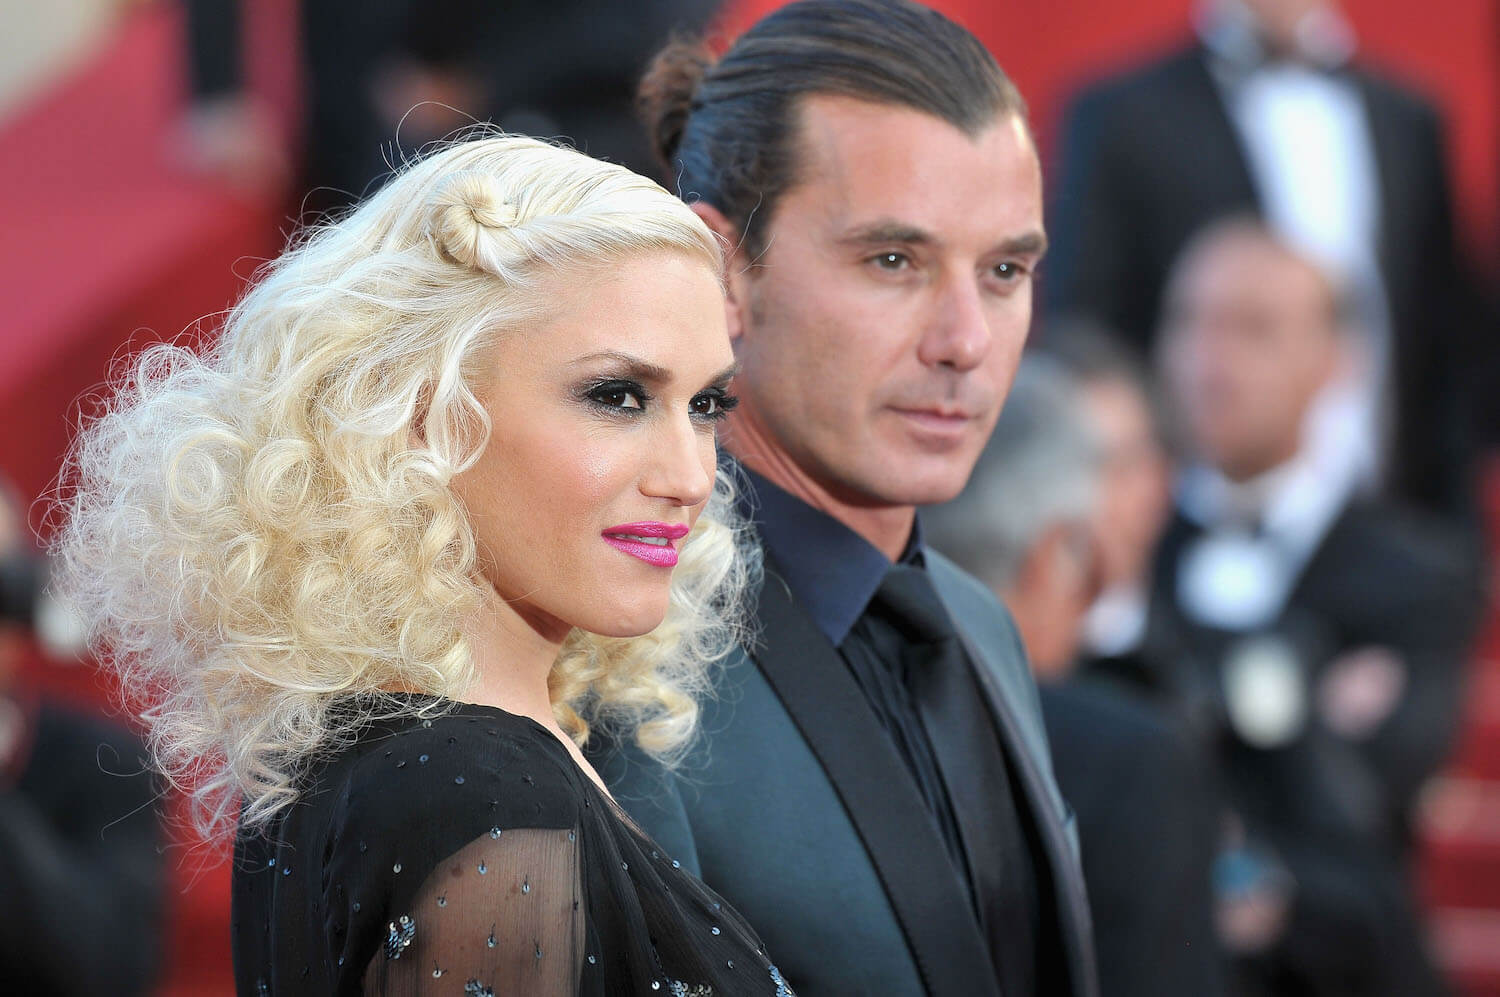 Gwen Stefani and Gavin Rossdale standing next to each other